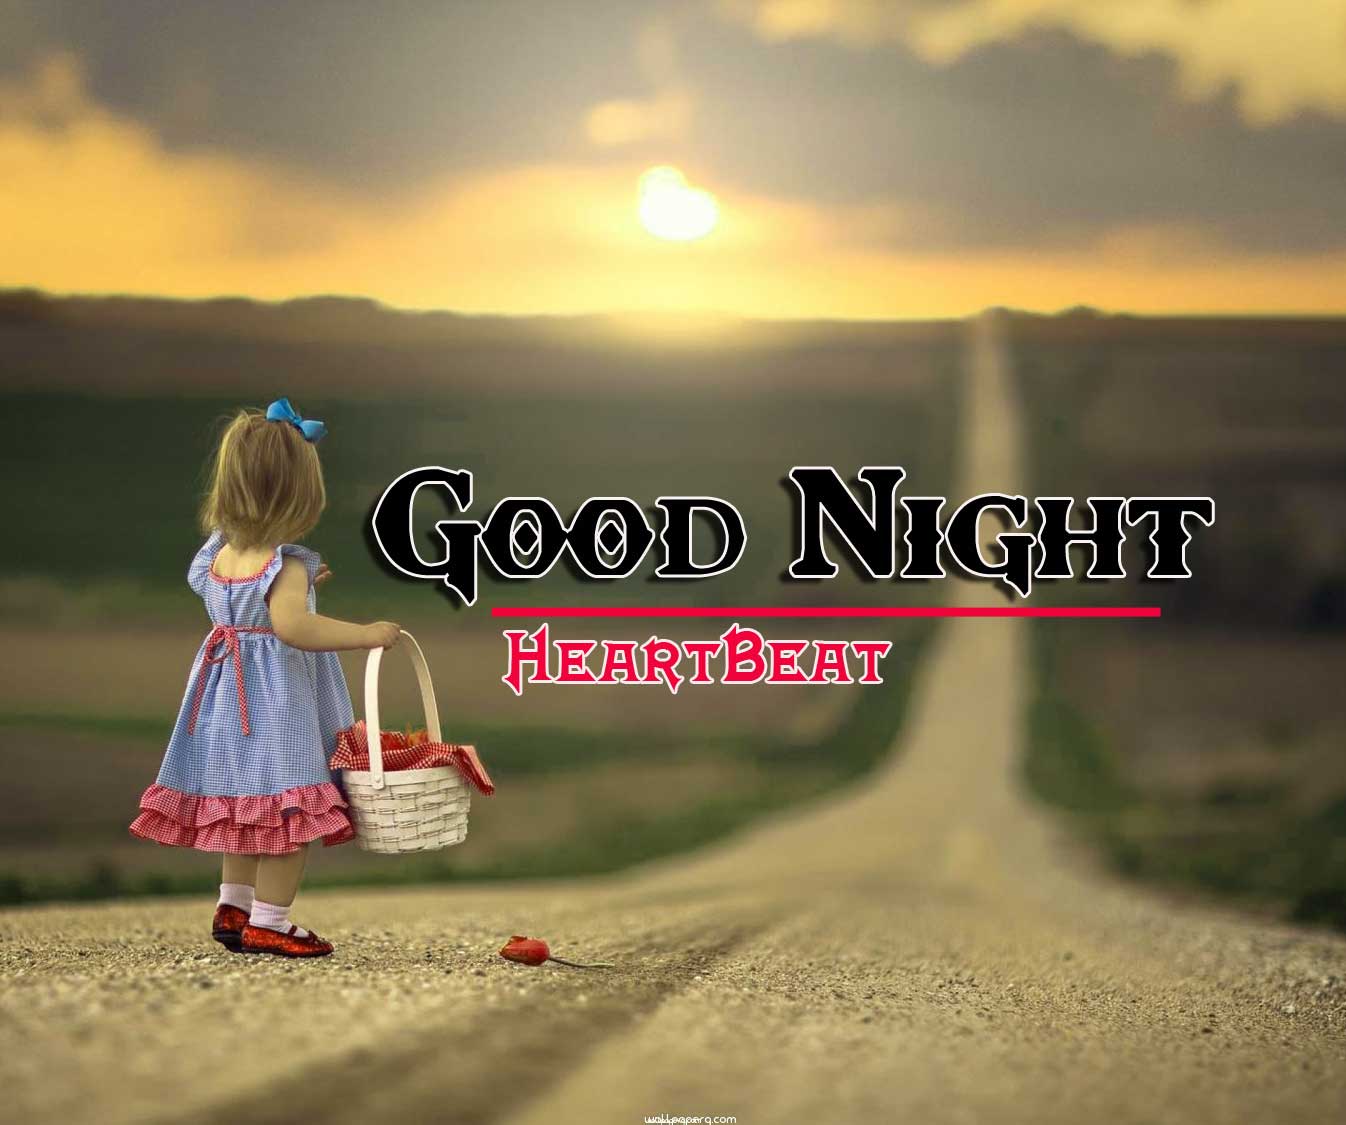 Good Night Wishes Images Pics Photo Download 